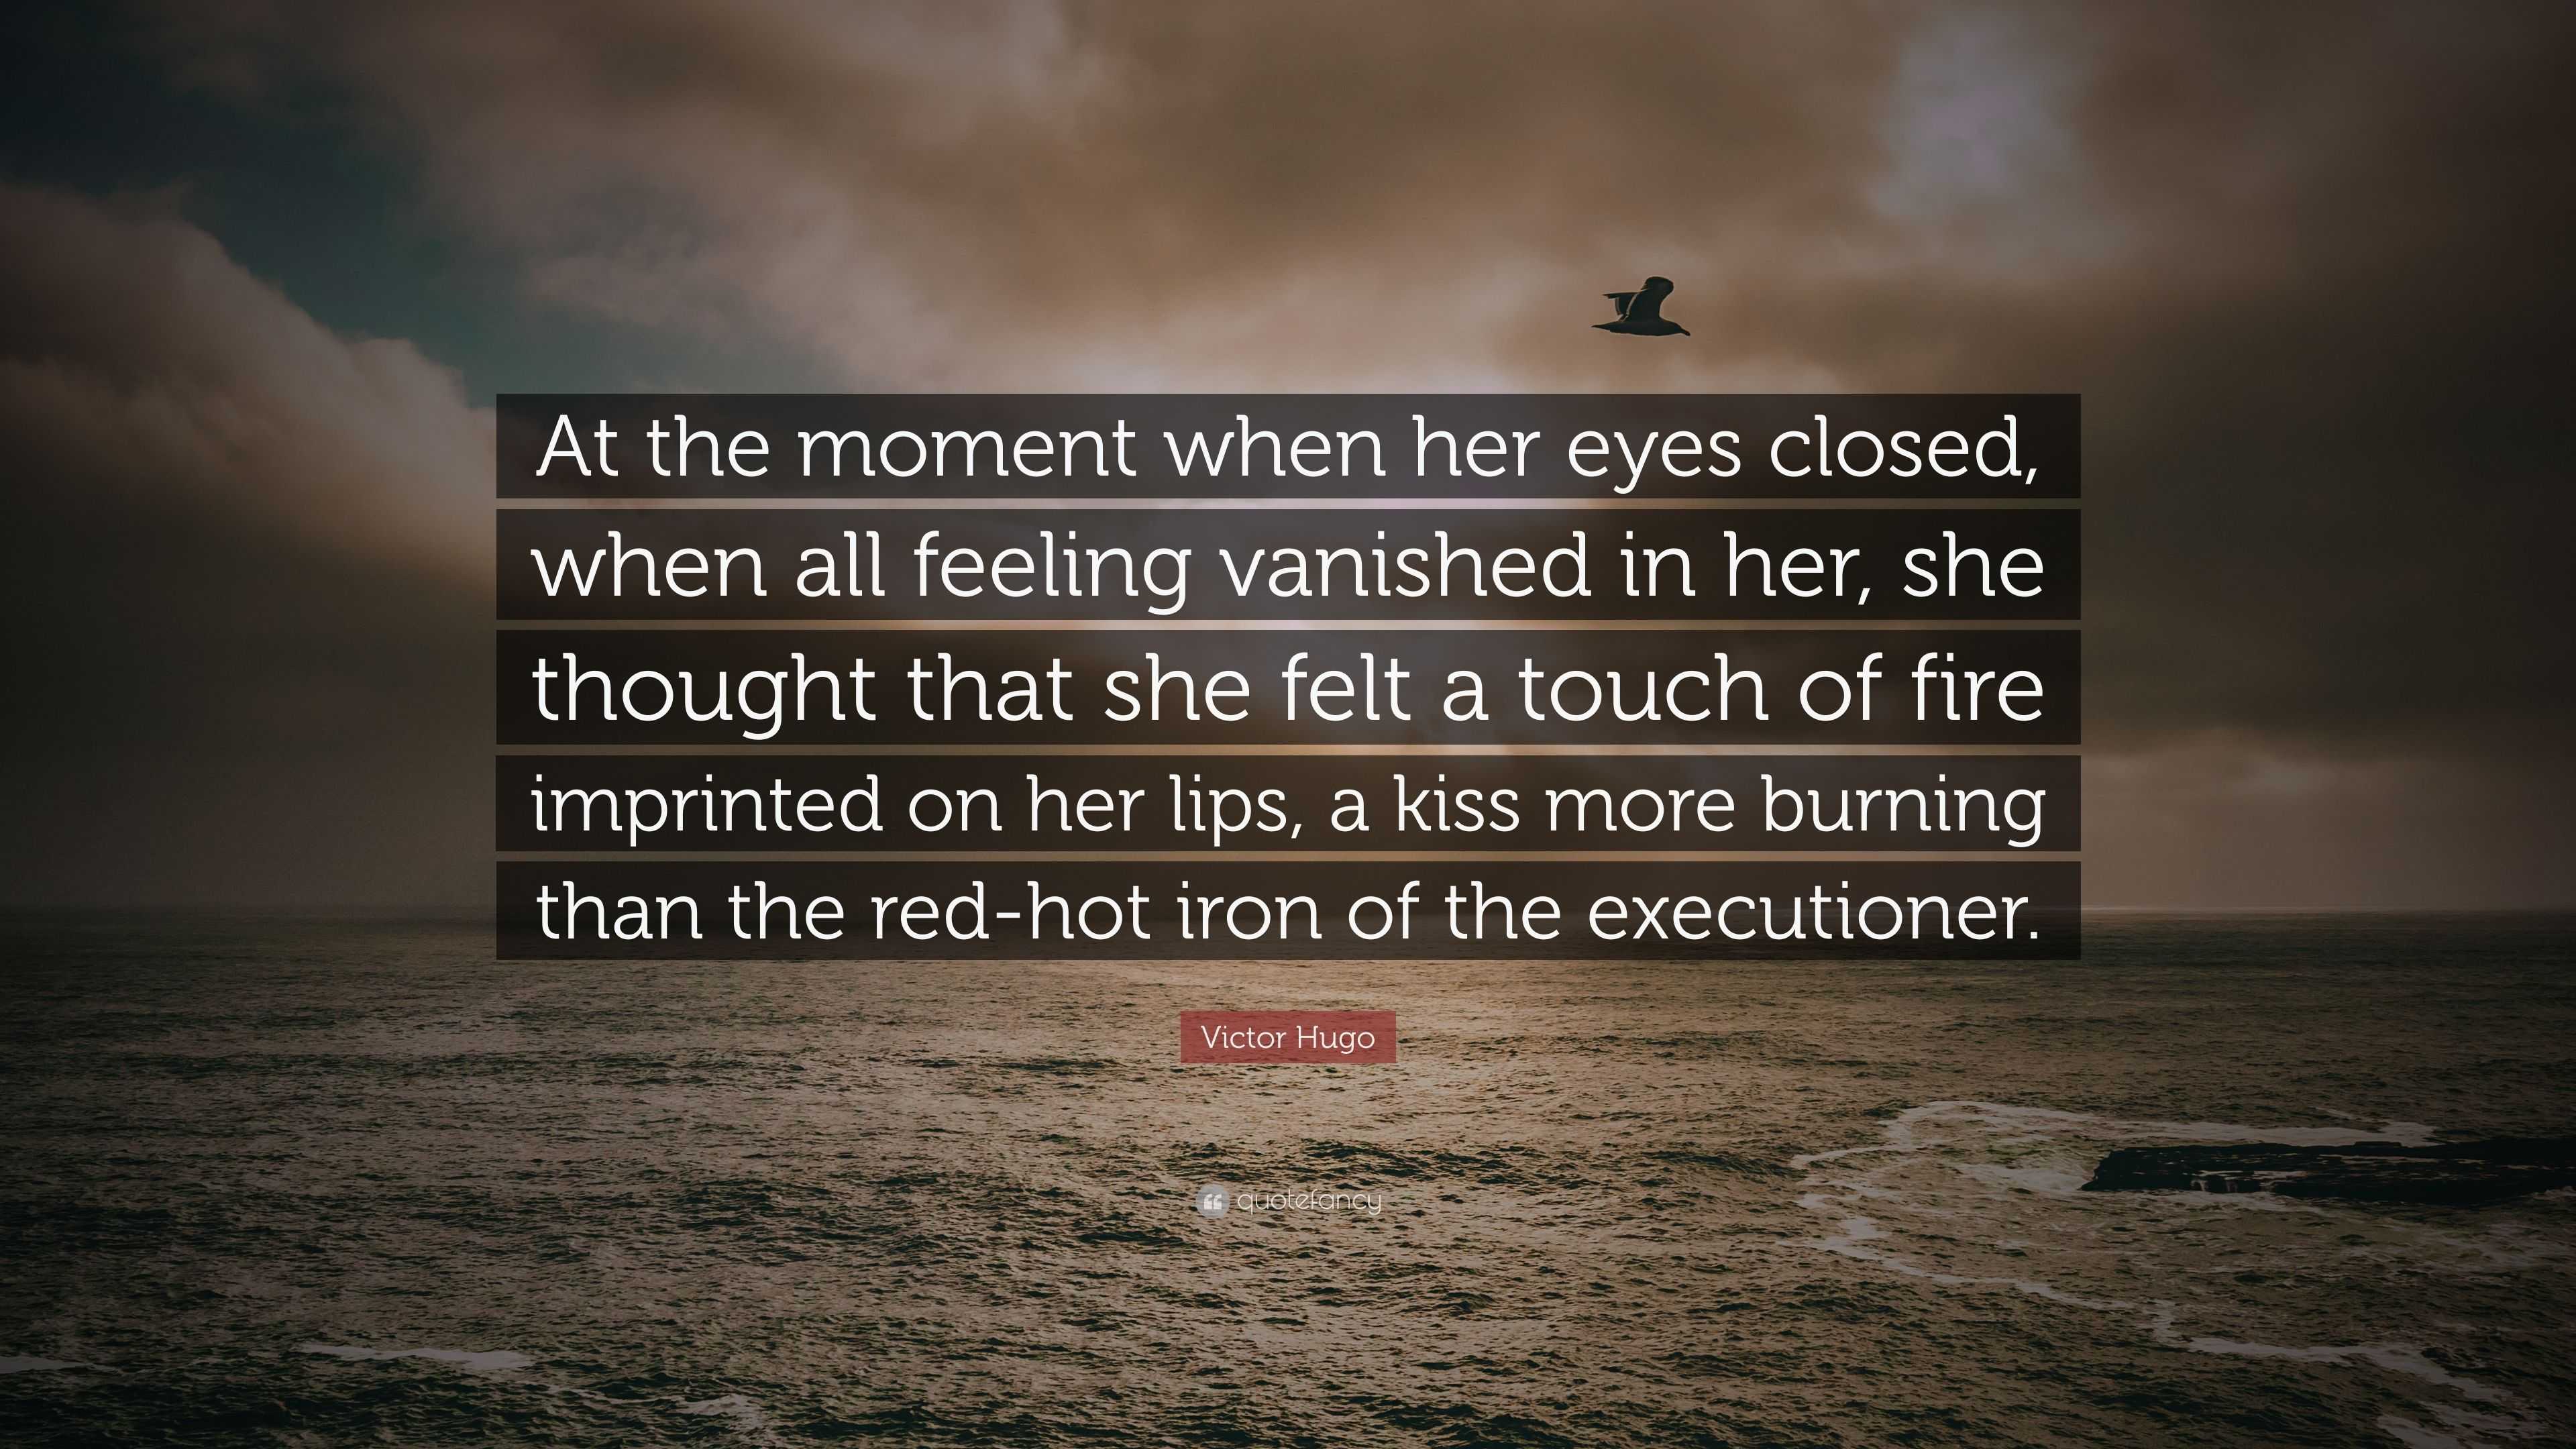 Victor Hugo Quote: “At the moment when her eyes closed, when all ...